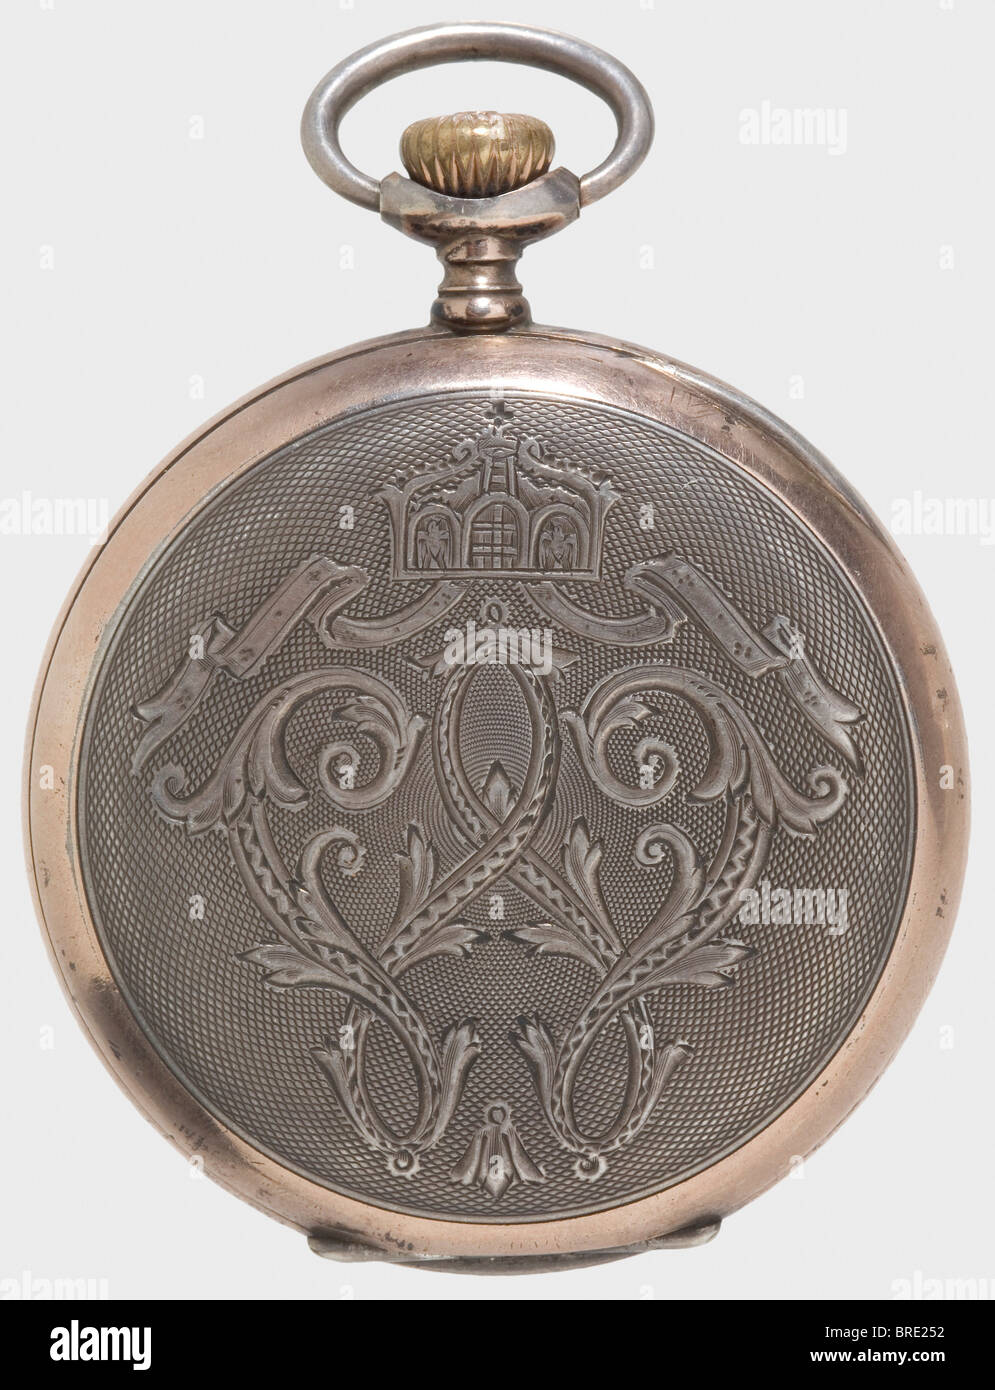 Kaiser Wilhelm II, a presentation watch for 25 years of service A silver pocket watch made by 'Longines' with rose gold-plated rims. White enamel dial with Arabic numerals, small second at the '6' position, and blued steel hands. The lid bears a 'W' cipher beneath an imperial crown and is engraved on the inside with: 'Für 25jährige treue Dienste dem Former August Müller - Kgl. Geschossfabrik in Spandau - 3.7.16'. (For 25 years loyal service, to the Moulder, August Müller - Royal Munitions Factory in Spandau - 3 July 1916). The outer lid bears a of the Kaiser in, Stock Photo